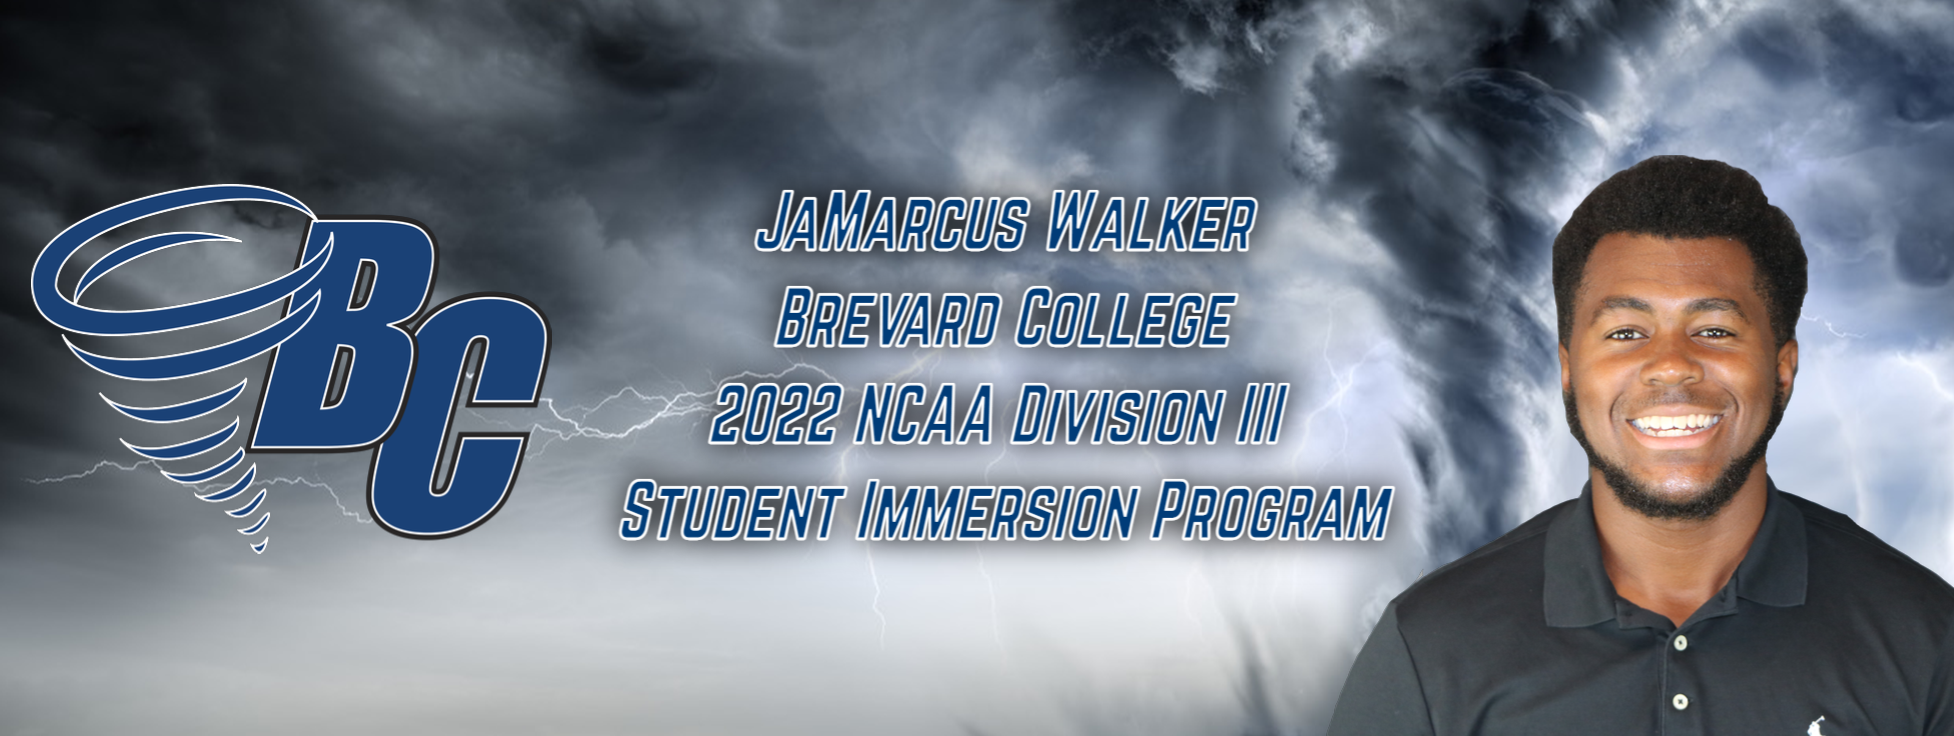 Walker of Brevard College Selected for NCAA Student Immersion Program